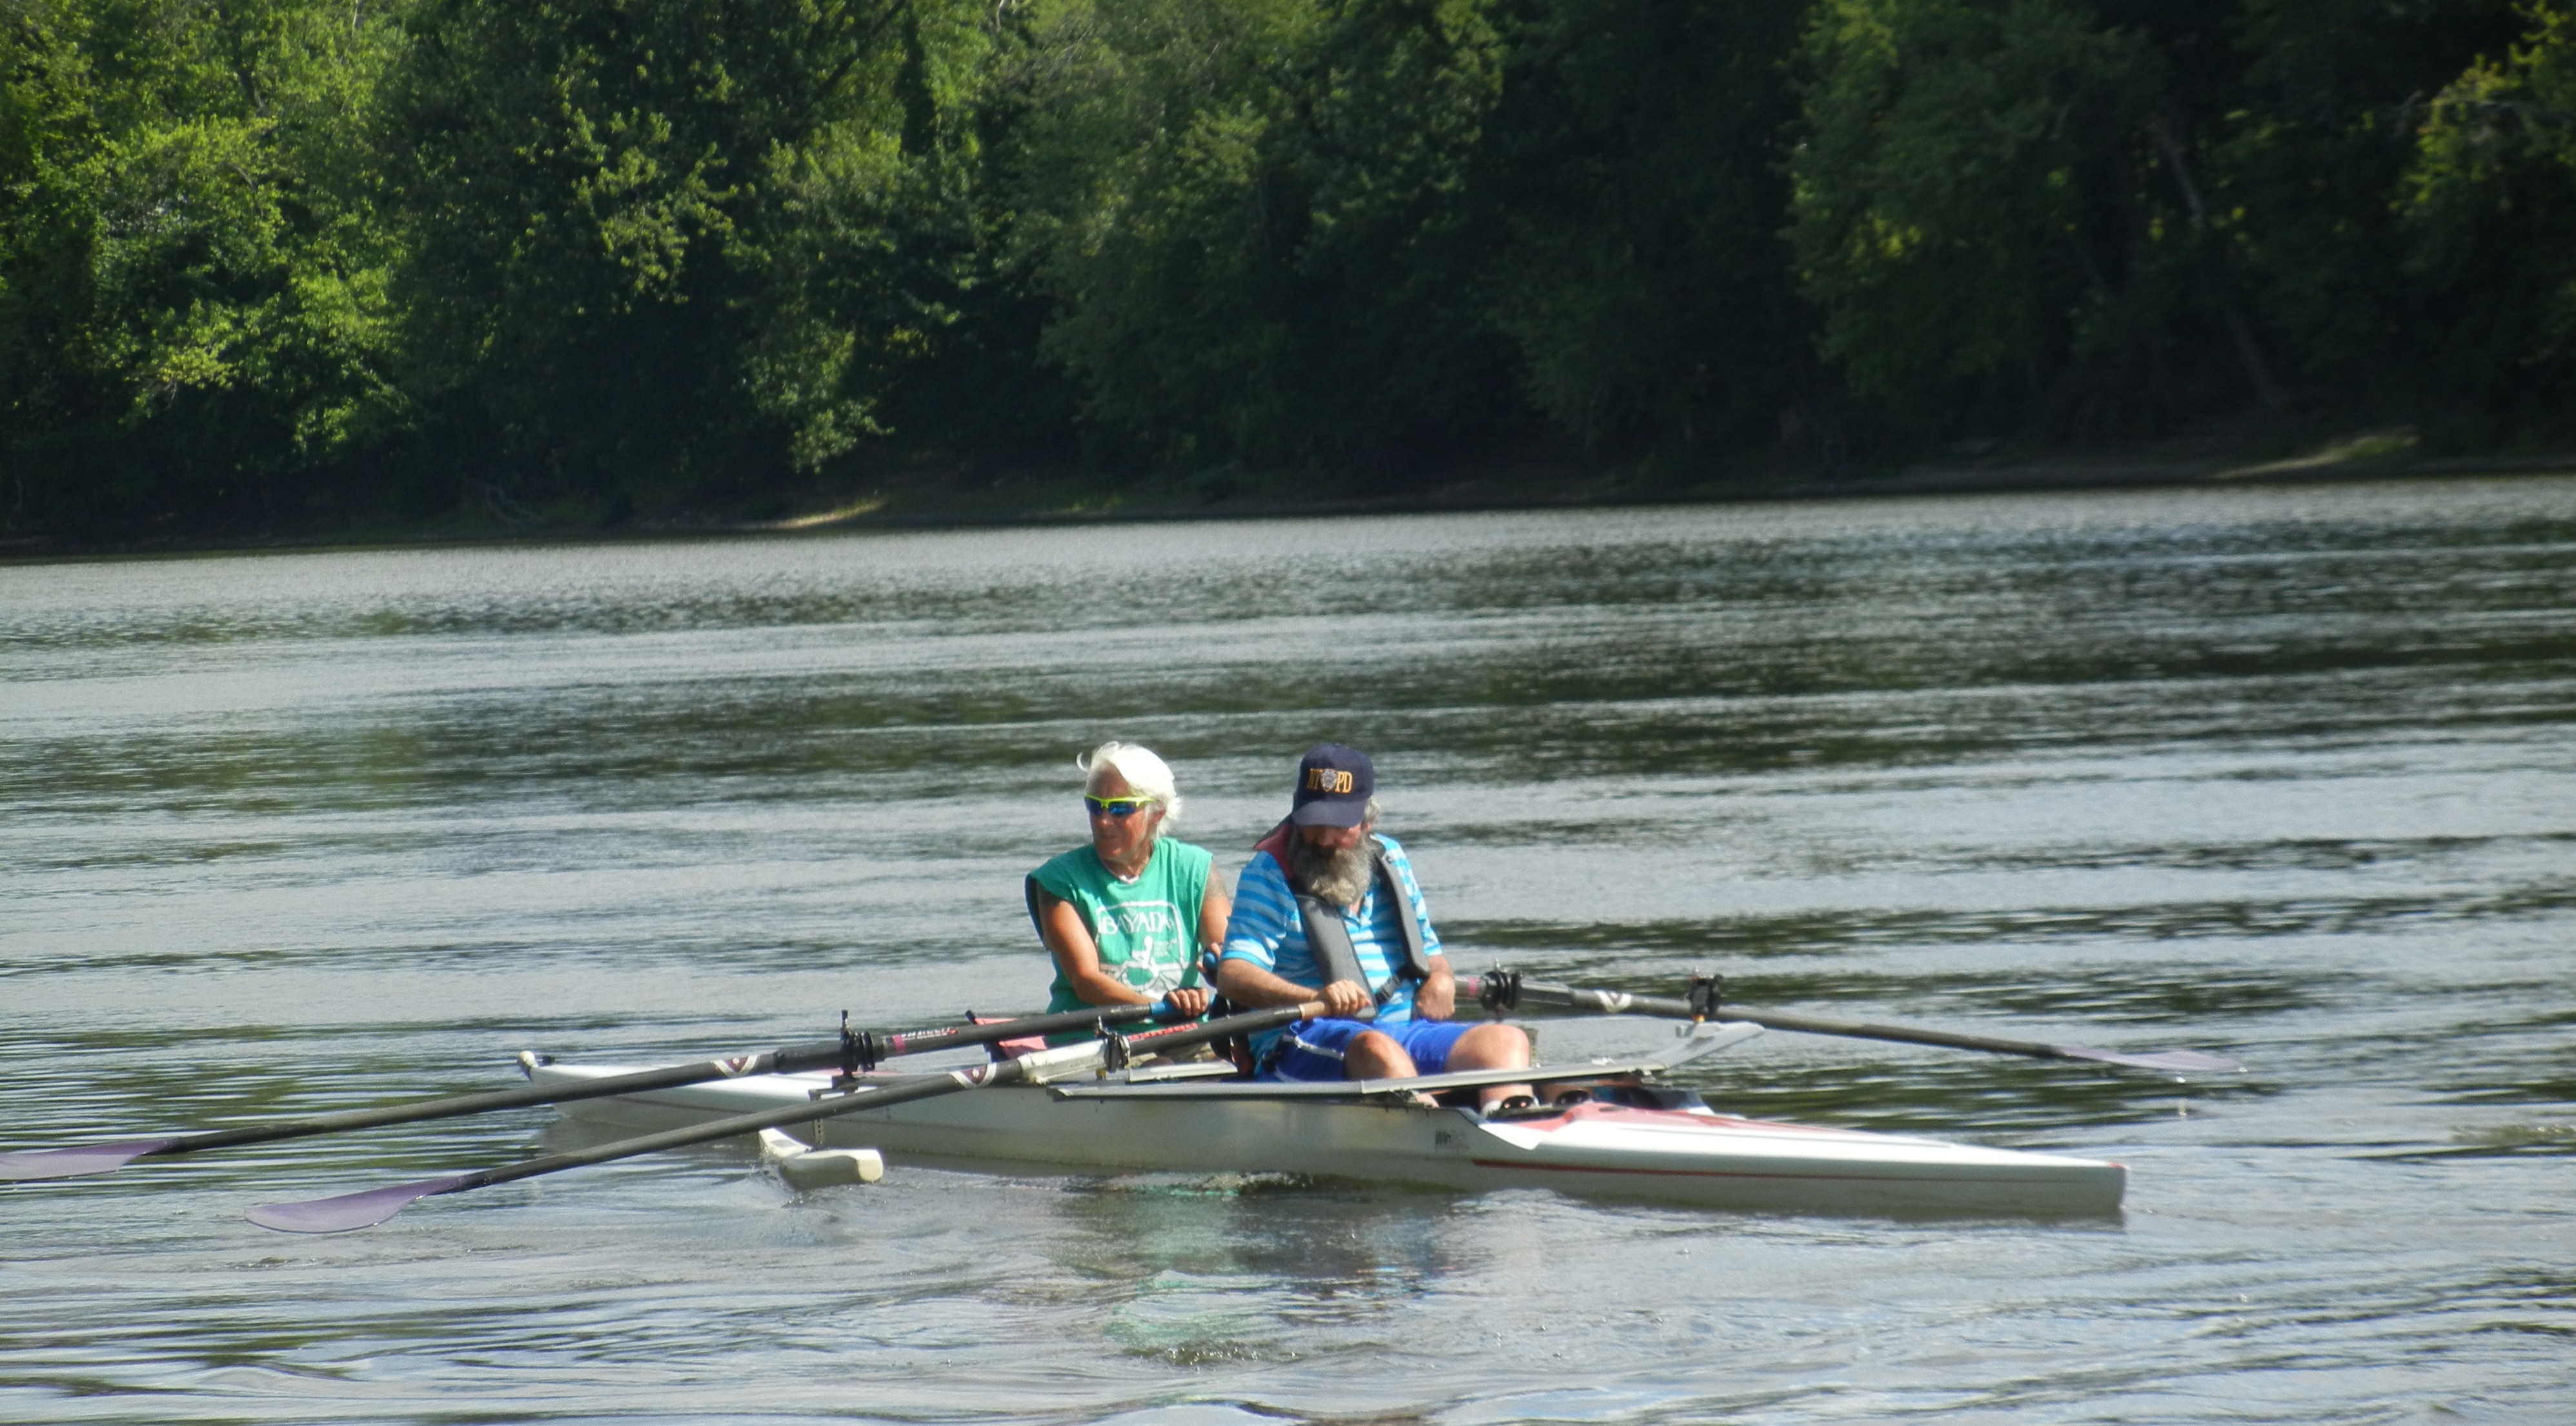 Two people are sculling in a double shell with outriggers on it.